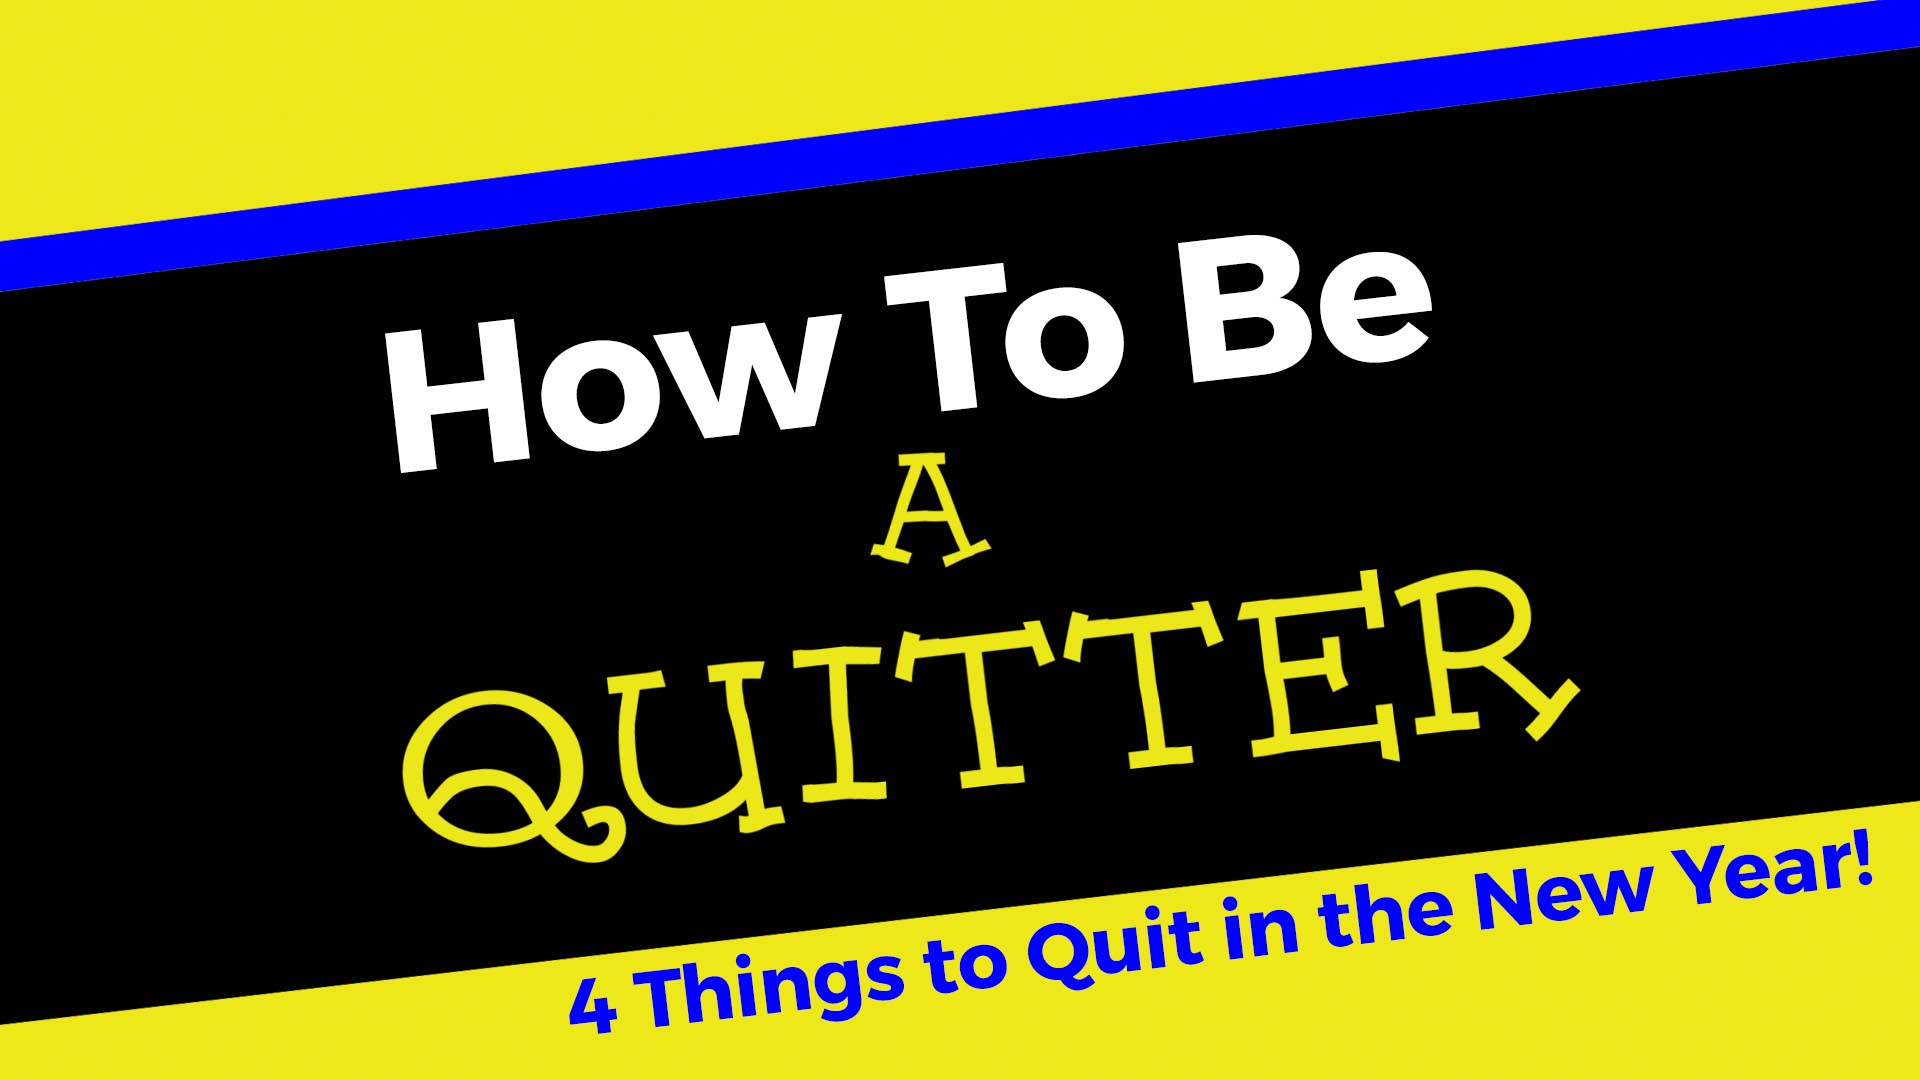 "How To Be A Quitter: 4 Things To Quit In The New Year!" Message Series